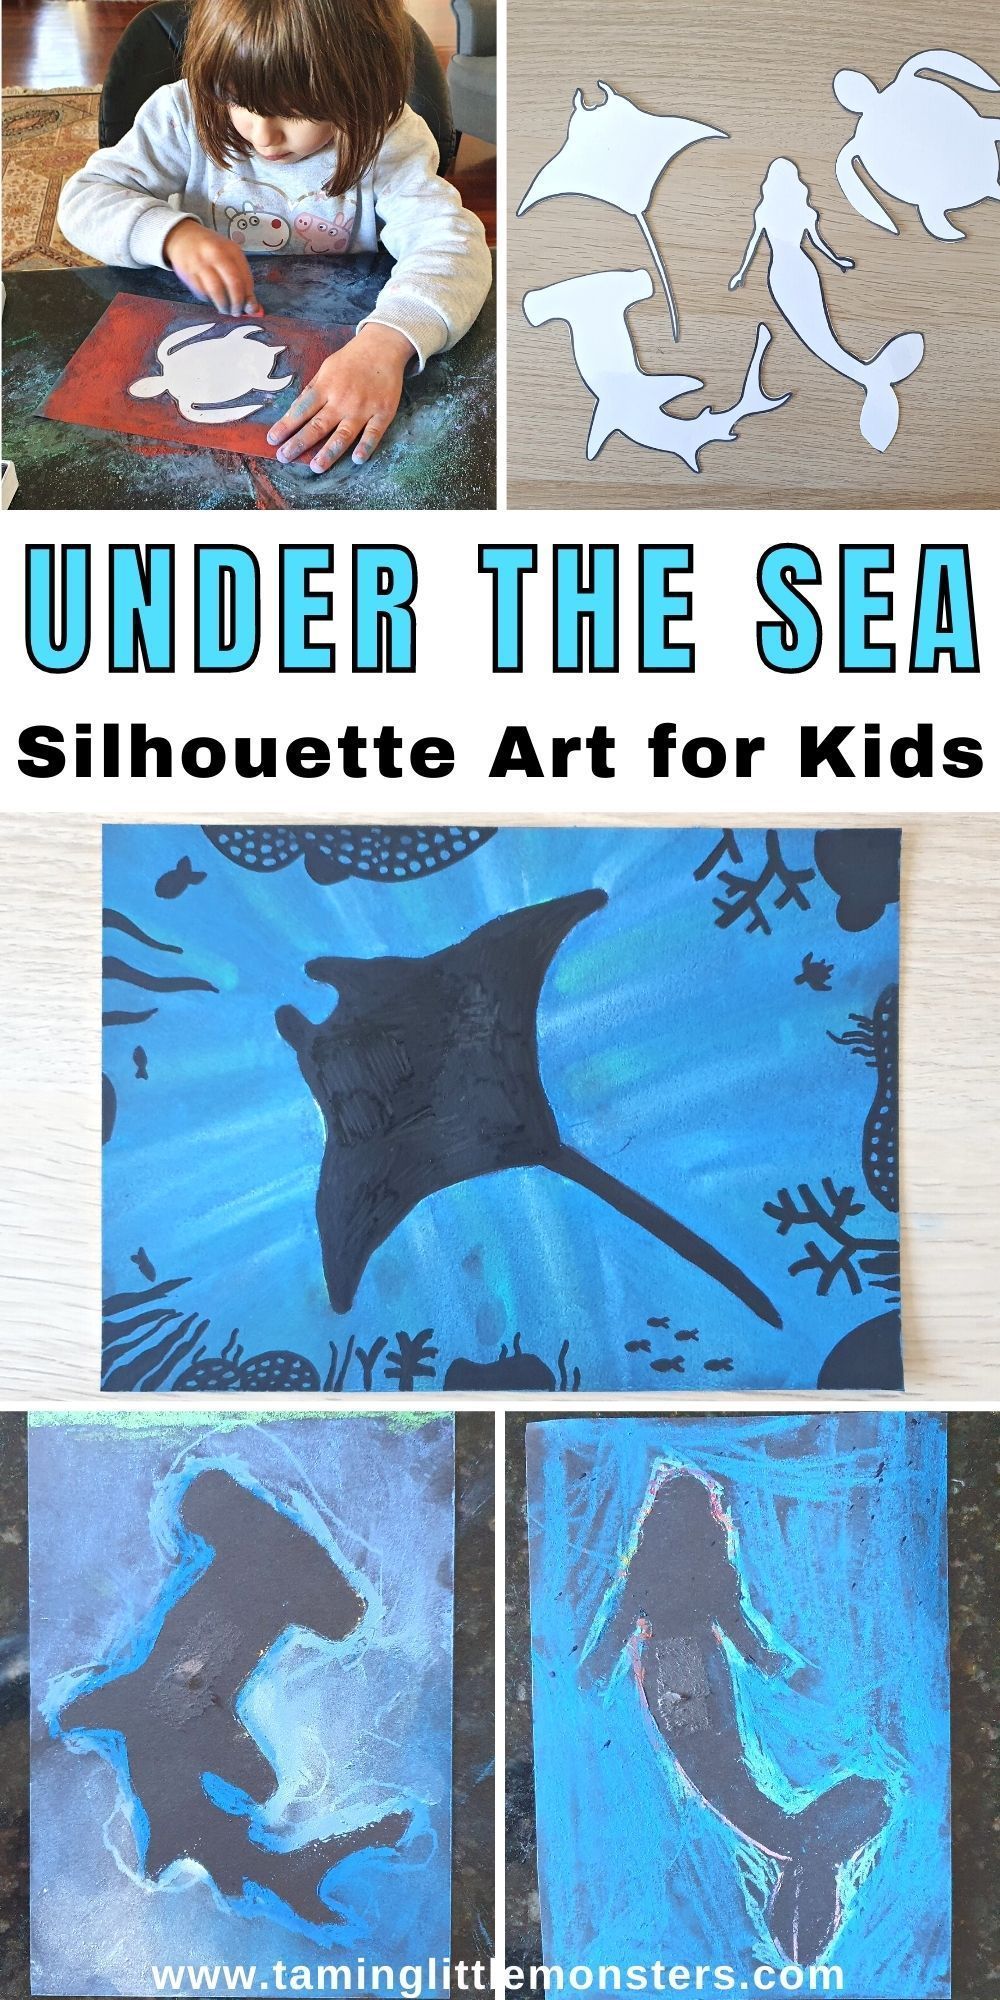 Under the Sea Silhouette Art for Kids - Taming Little Monsters